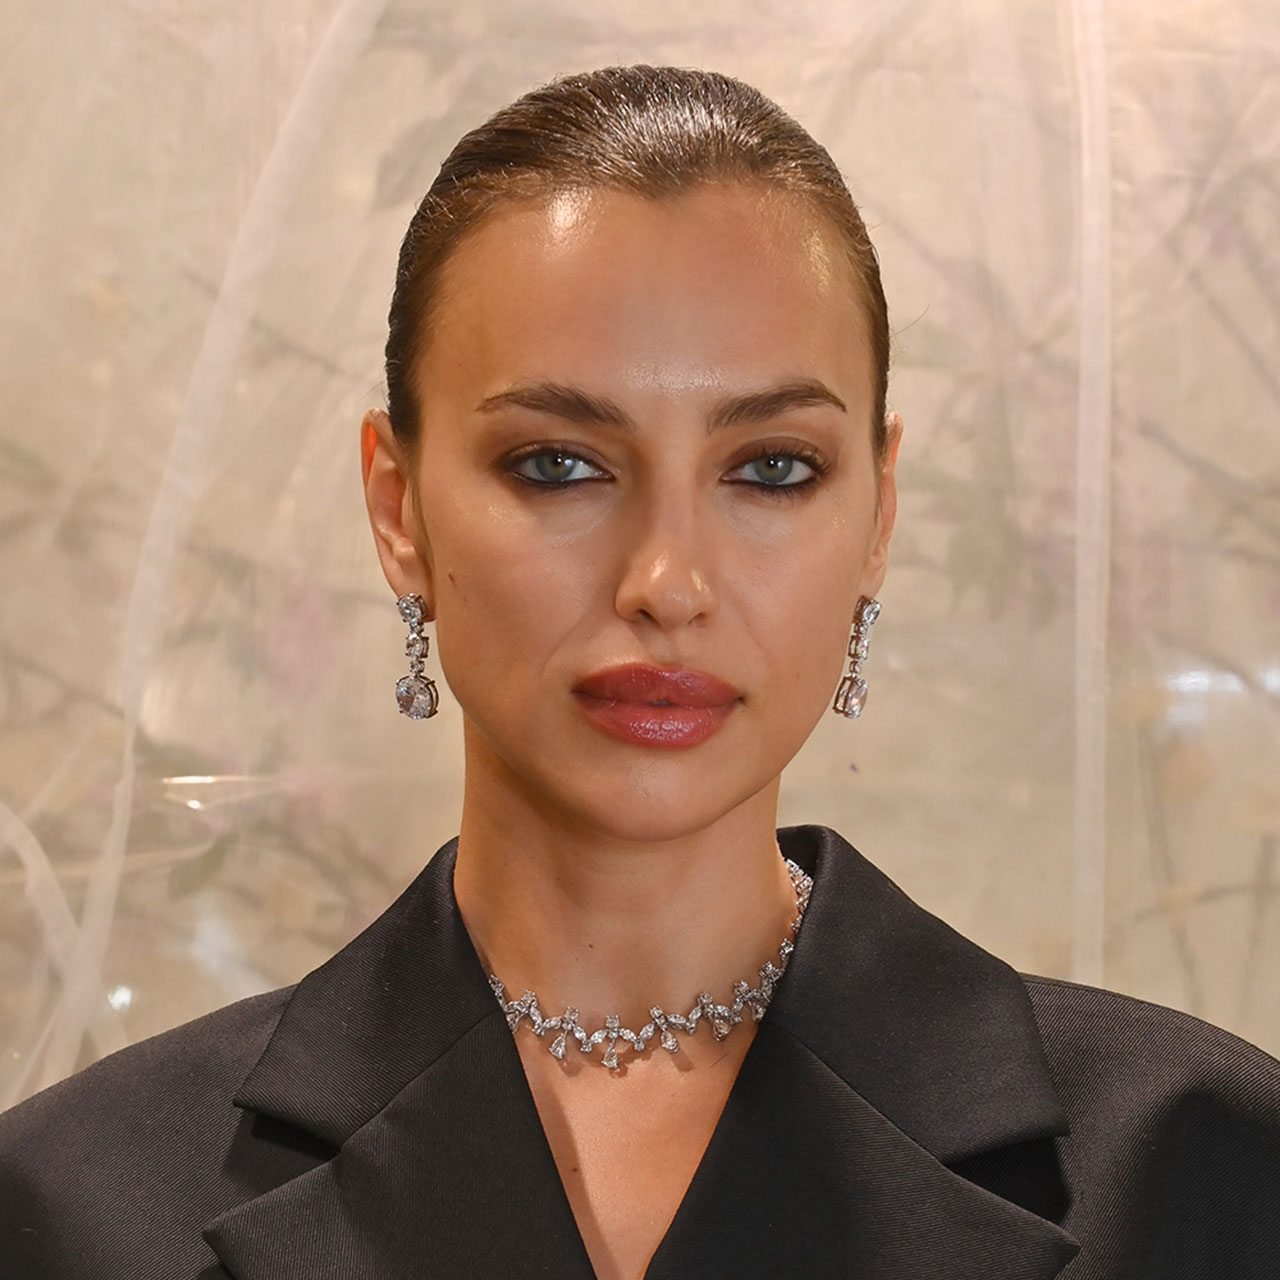 Irina Shayk embraces the no-pants trend in a belted blazer for the H&M & Rokh launch in London